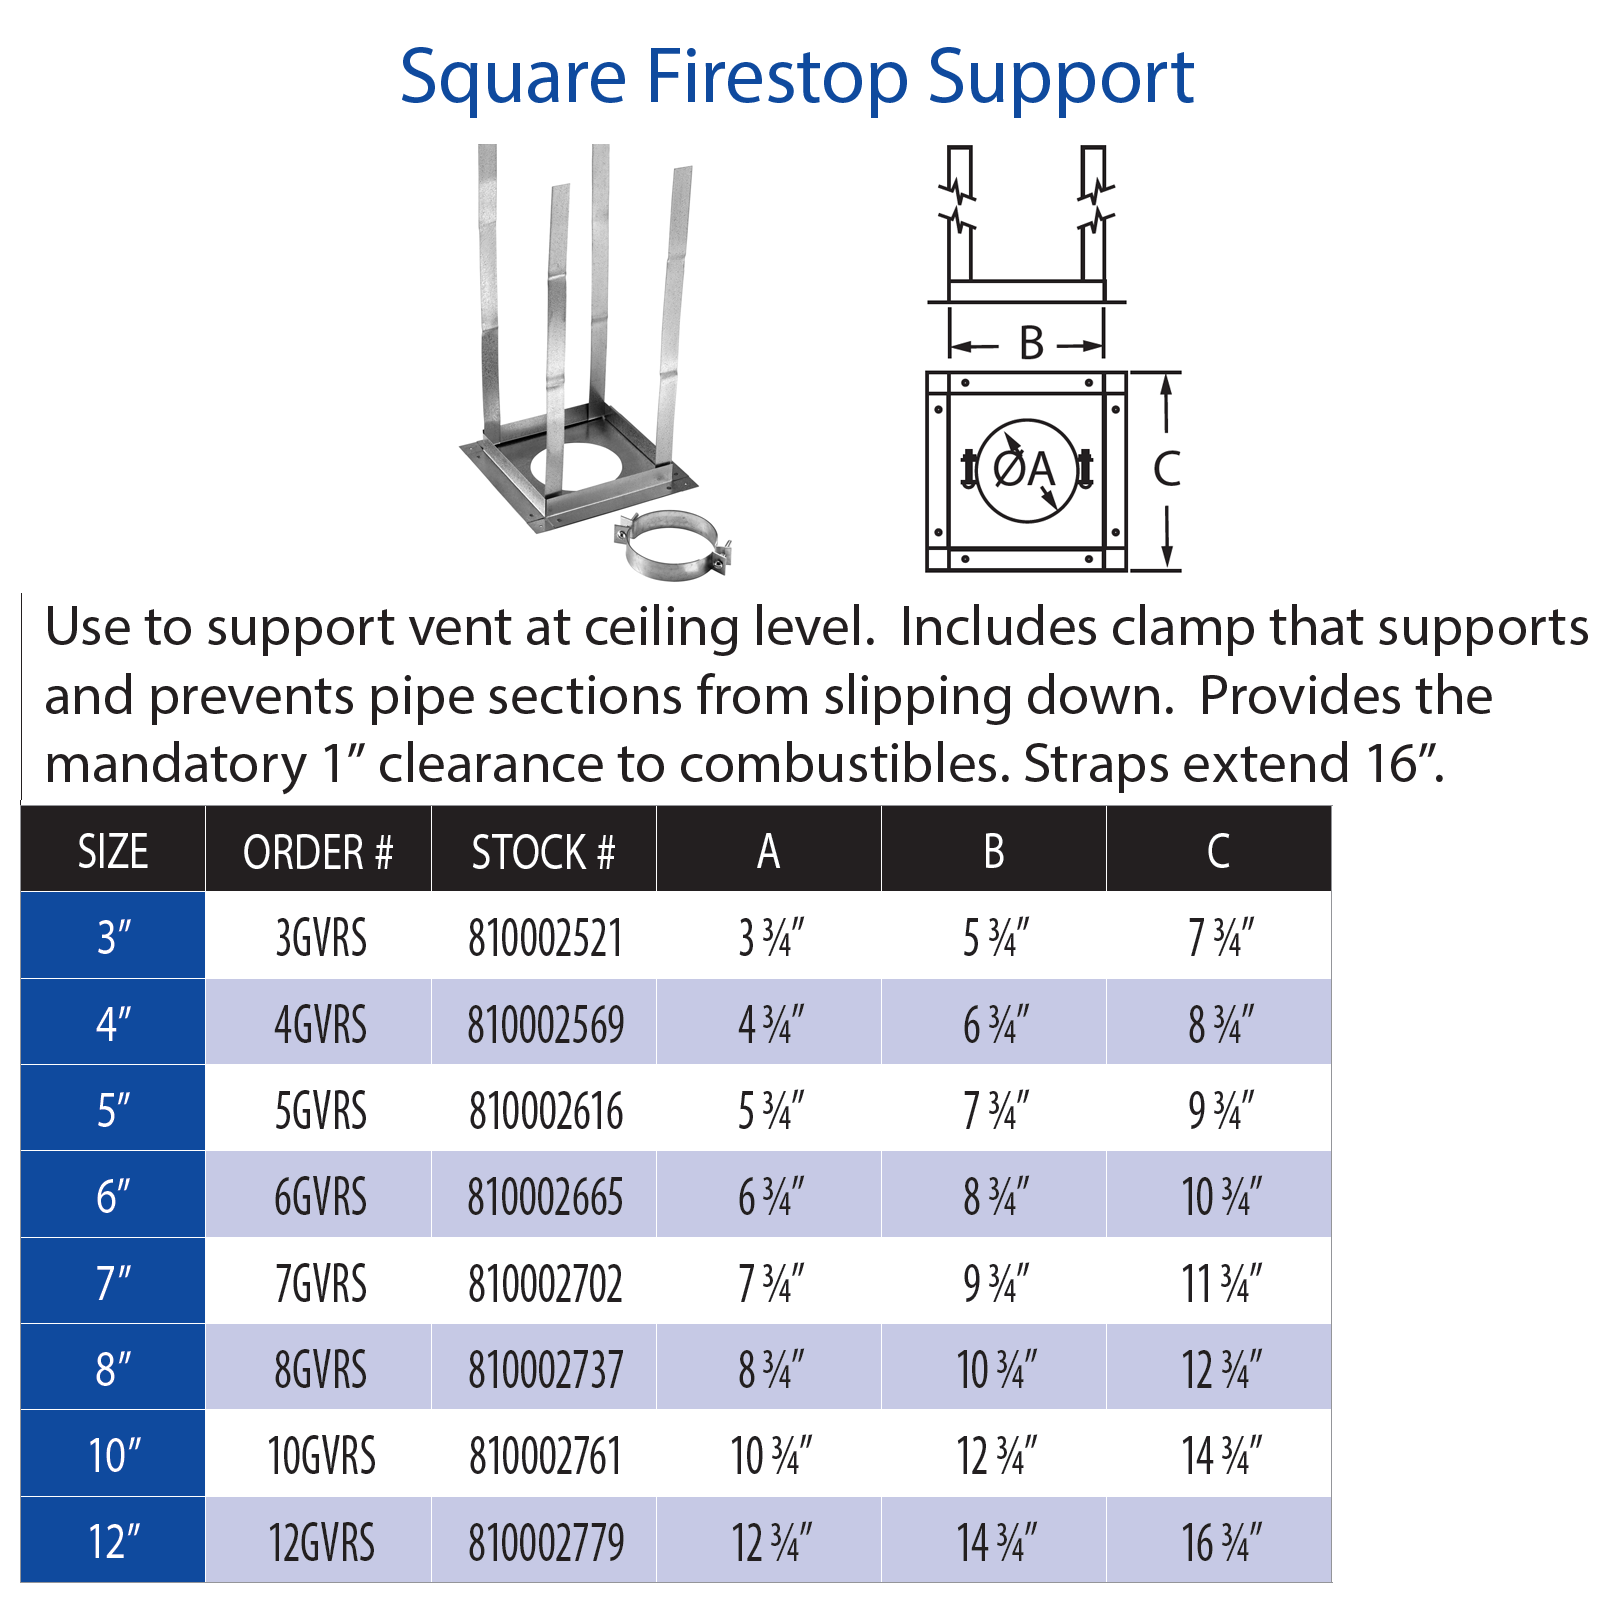 DuraVent Type B Square Firestop Support | 6GVRS